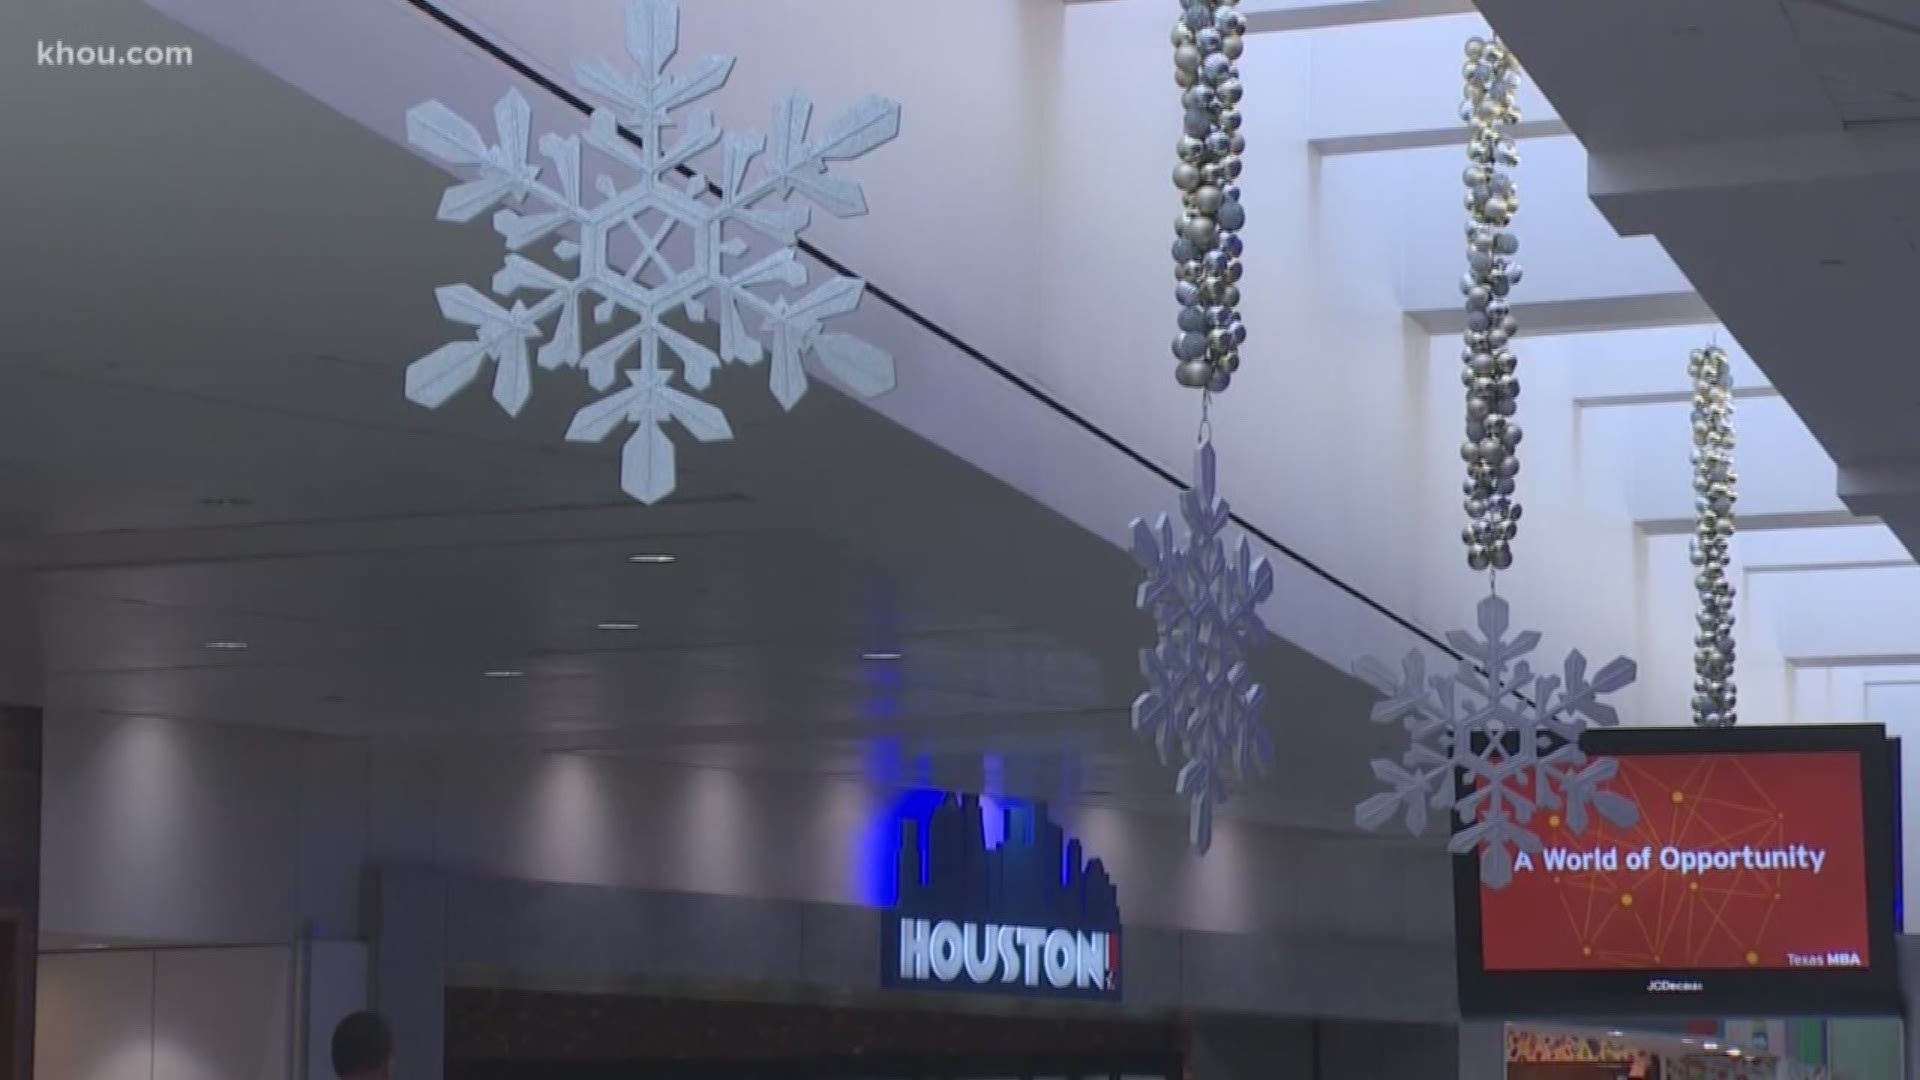 Houston airports are working to alleviate some of the stress travelers tend to feel during the holidays.